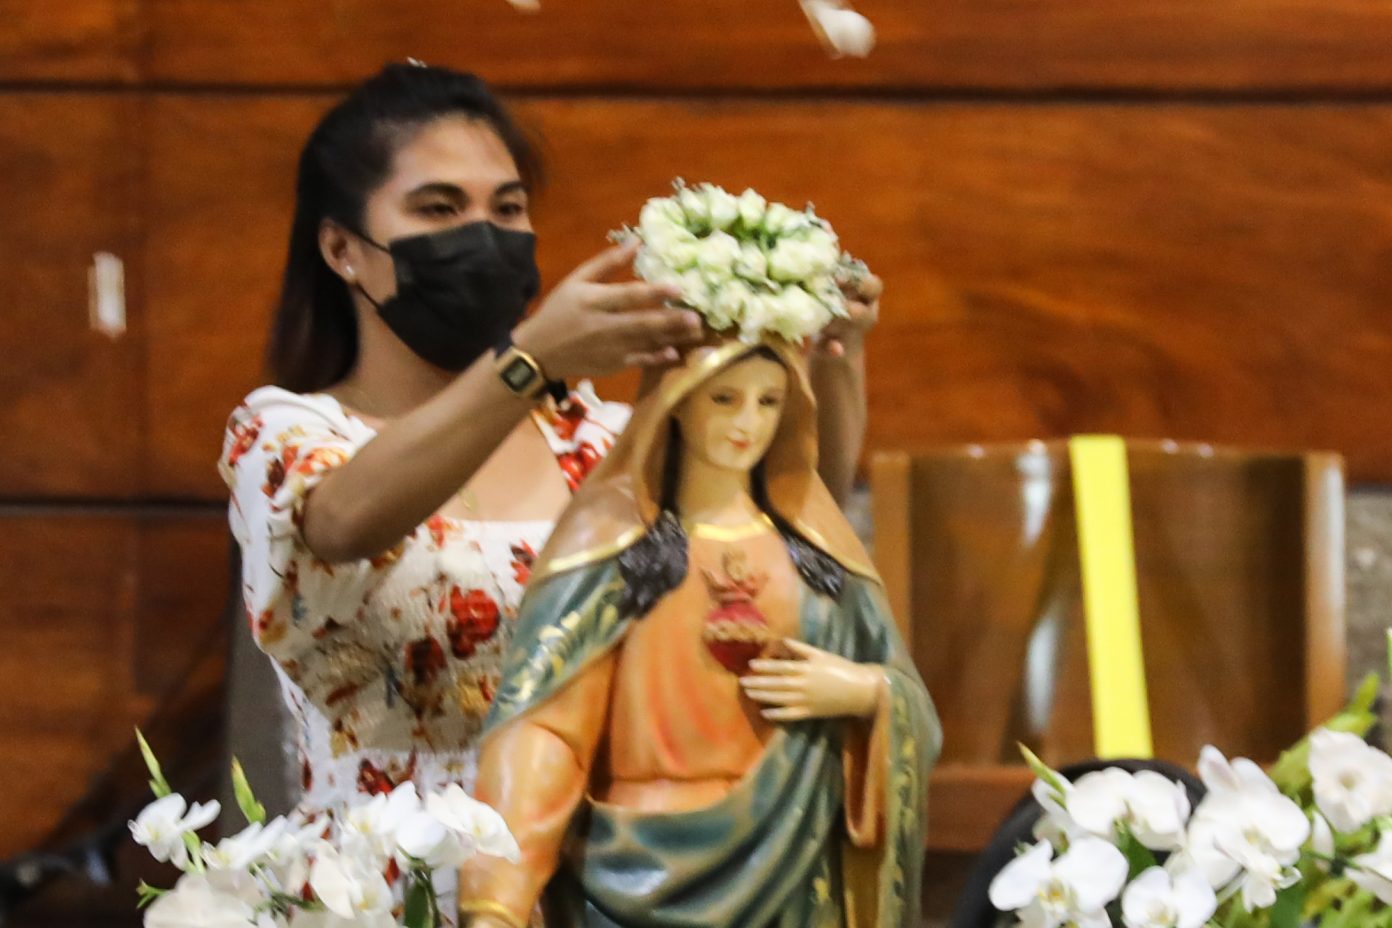 Photos Philippines’ ‘Flores de Mayo’ during the pandemic Catholic